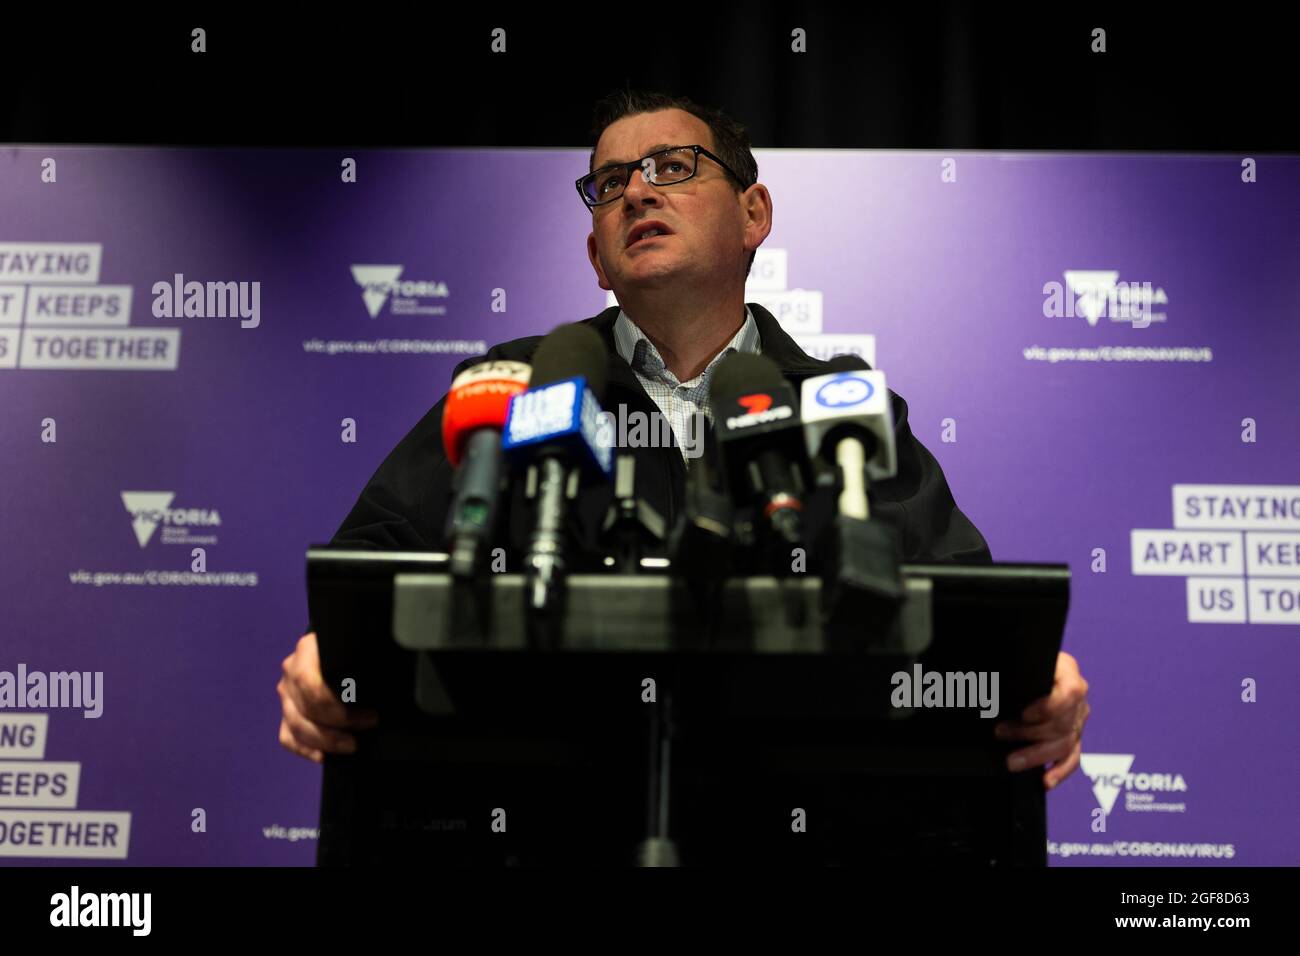 Melbourne, Australia, 15 July, 2020. Premier Daniel Andrews addresses the media for his daily update during COVID 19 on 15 July, 2020 in Melbourne, Australia. A further 238 COVID-19 cases have been discovered overnight, bringing Victoria’s active cases to over 2000, speculation is rising that almost all of Victoria’s current cases stem from the Andrews Government botched hotel quarantine scheme as well as the Black Lives Matter protest.  Premier Daniel Andrews warns that Victoria may go to Stage 4 lockdown if these high numbers continue. Credit: Dave Hewison/Speed Media/Alamy Live News Stock Photo